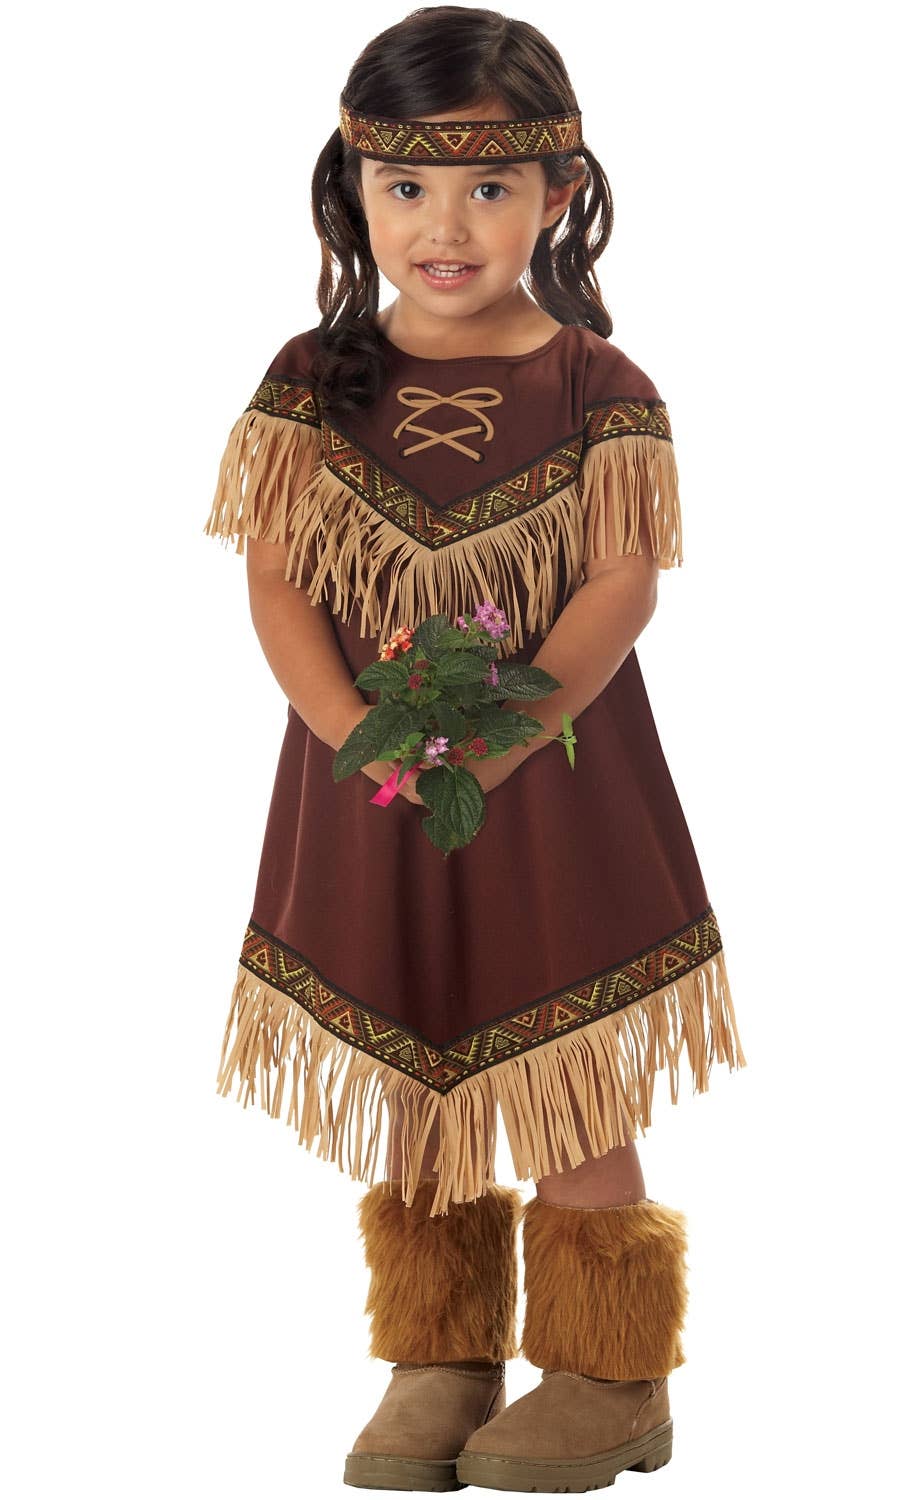 Lil Indian Native American Girls Costume Image 1 